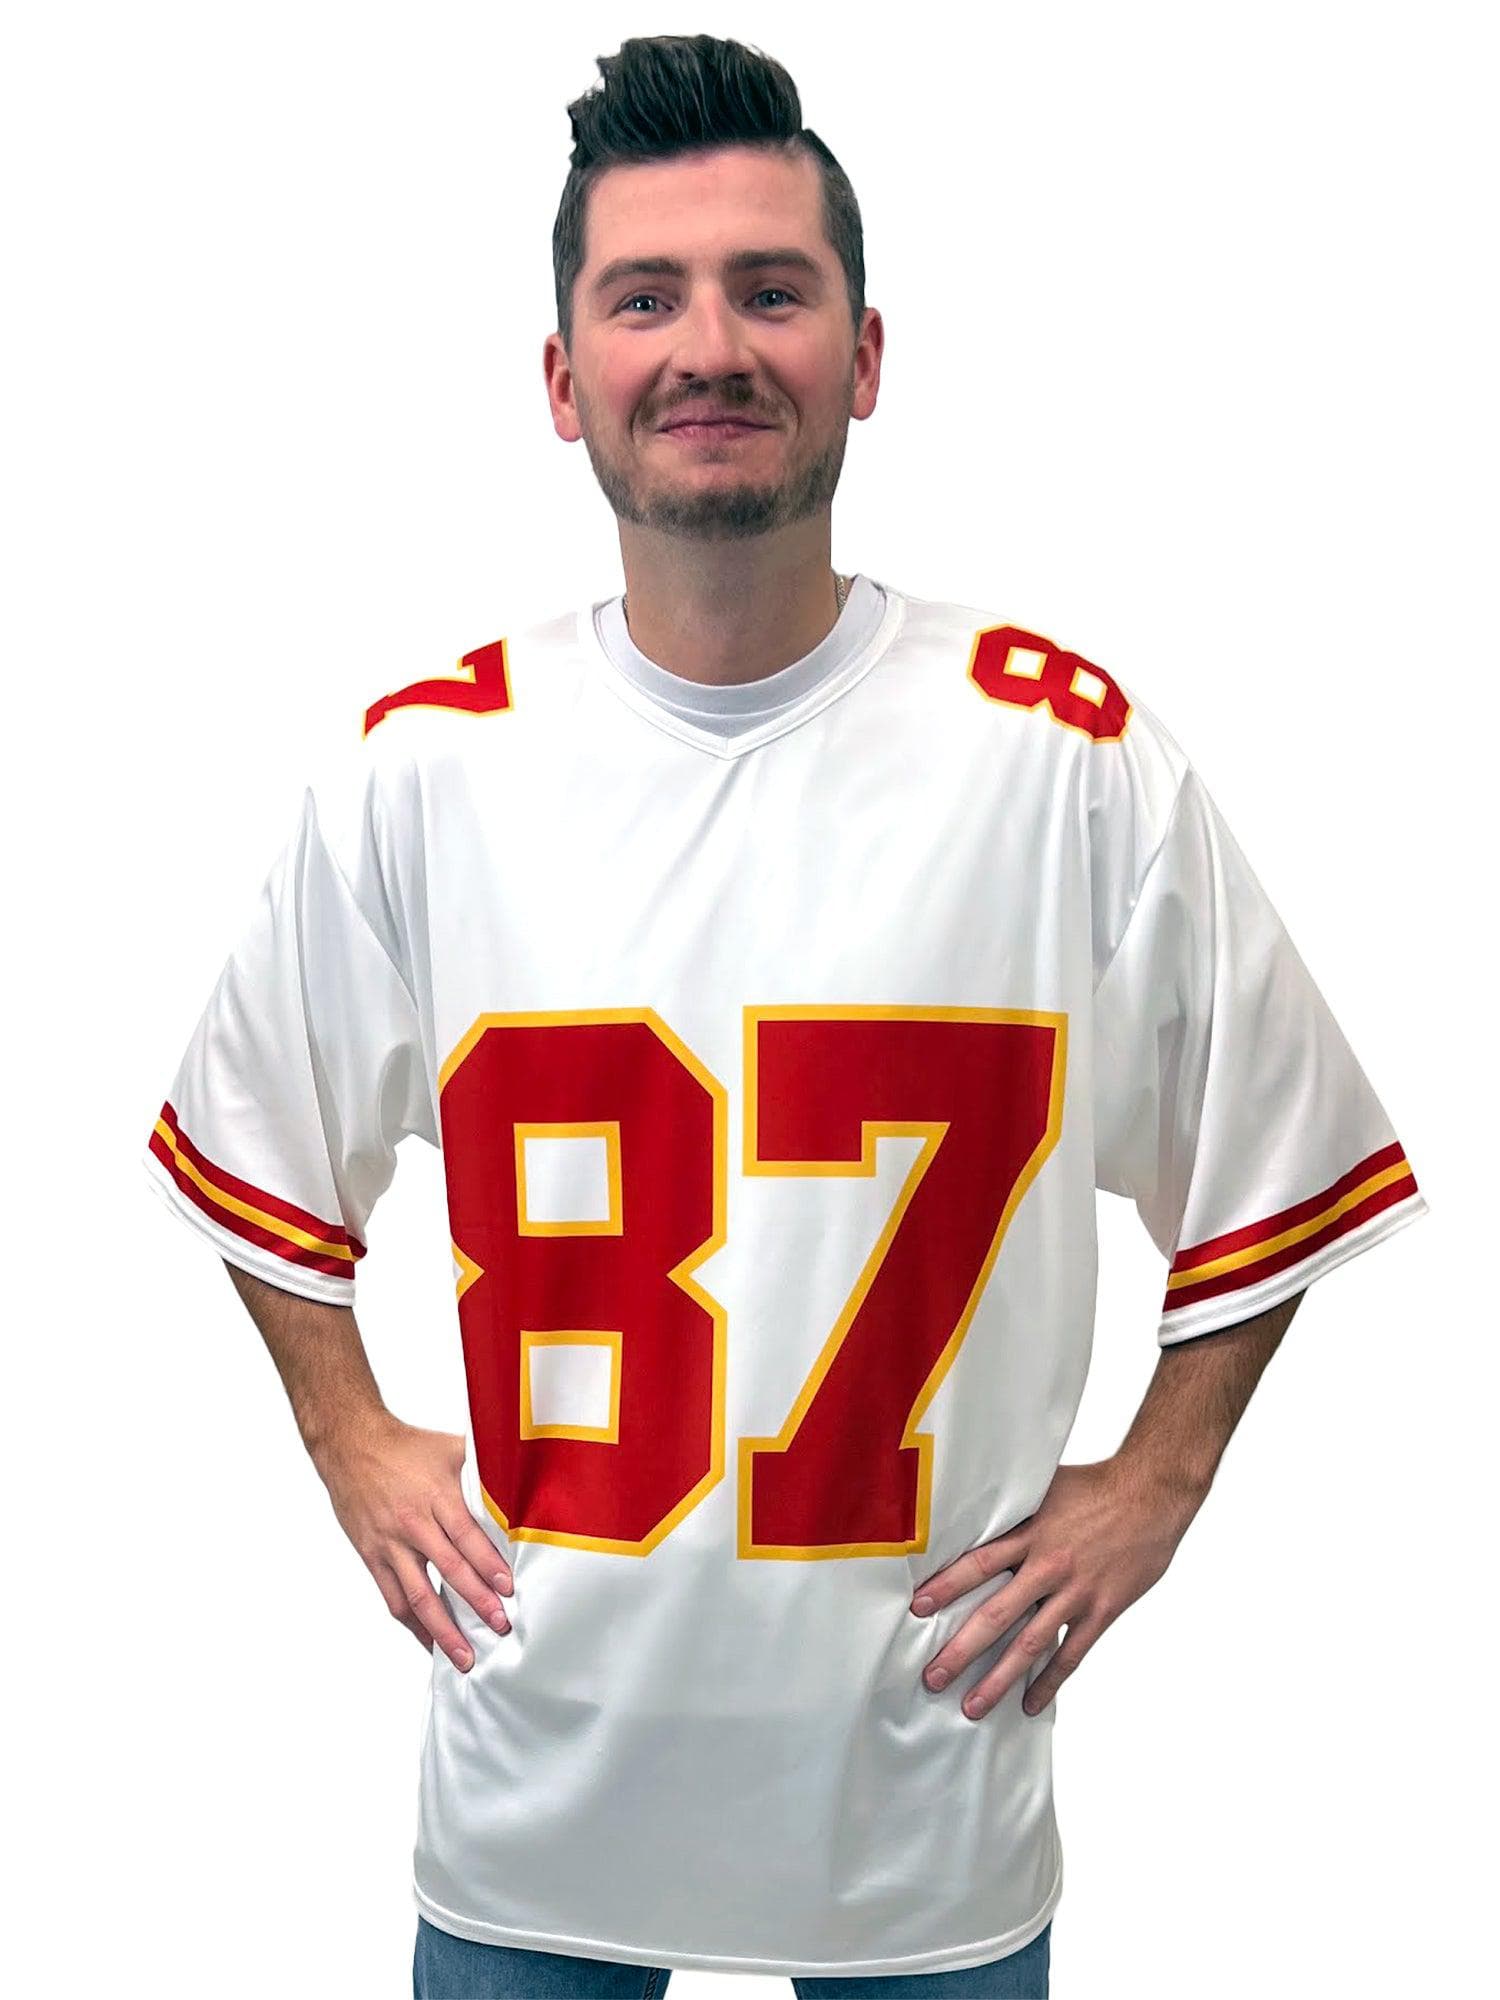 Football Era White and Red Number 87 Jersey - costumes.com